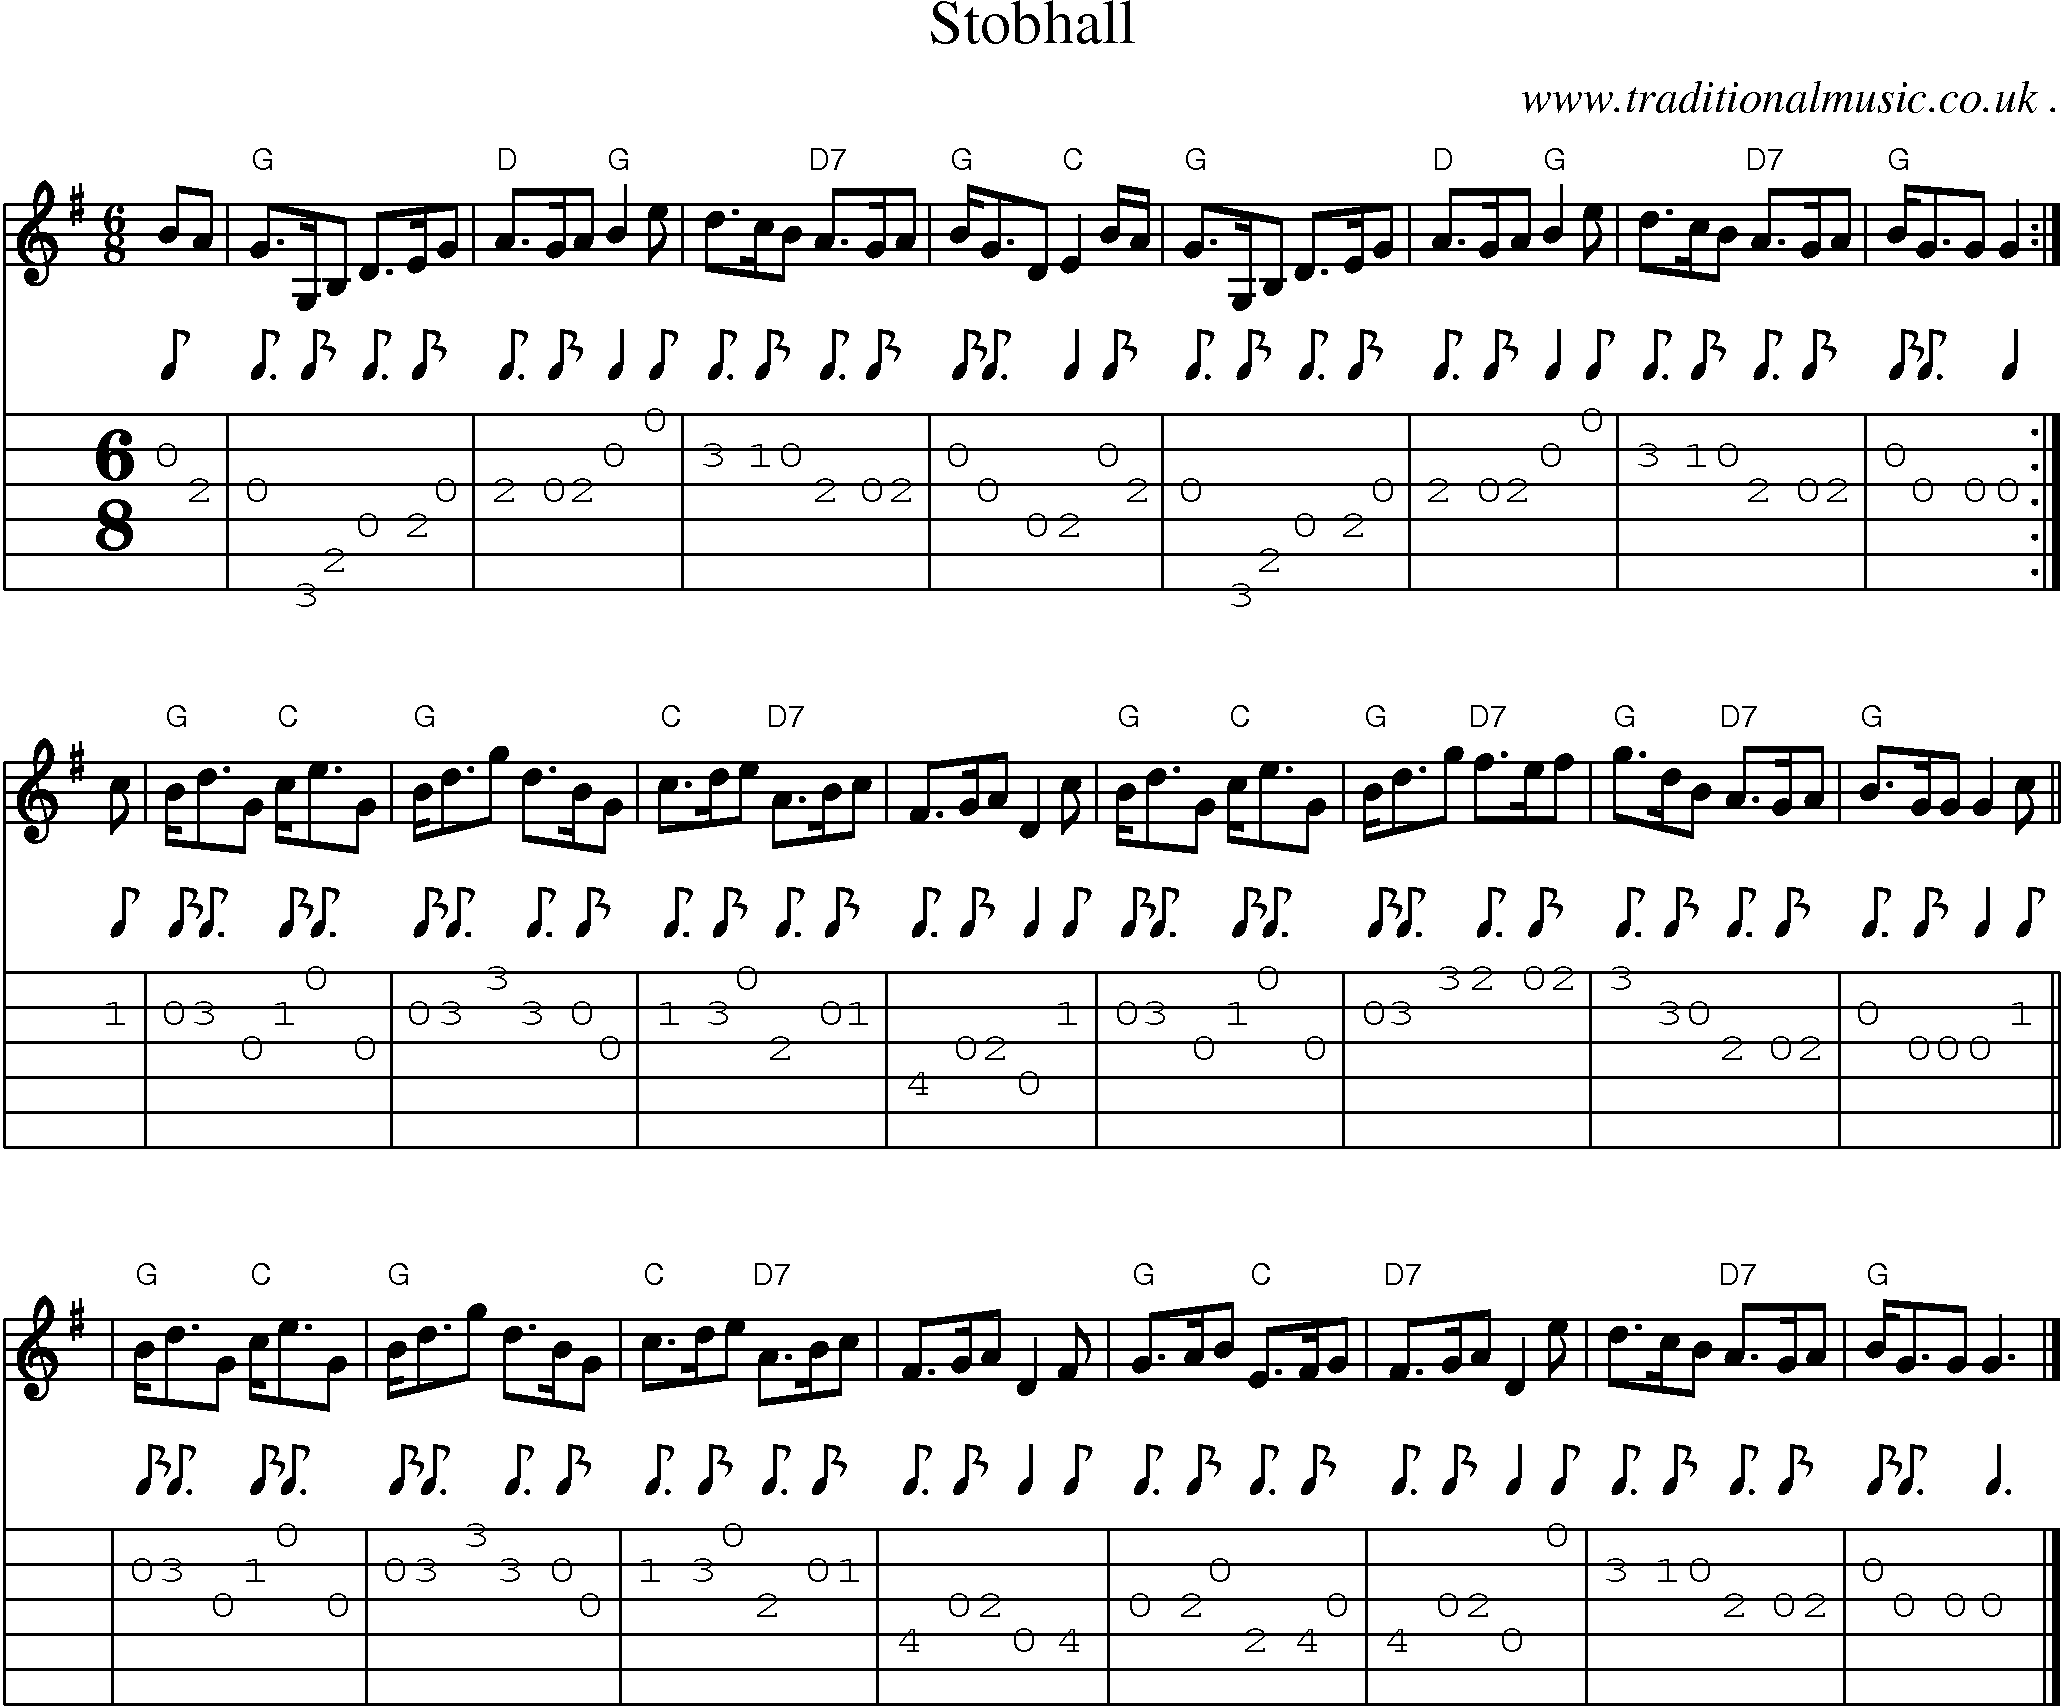 Sheet-music  score, Chords and Guitar Tabs for Stobhall